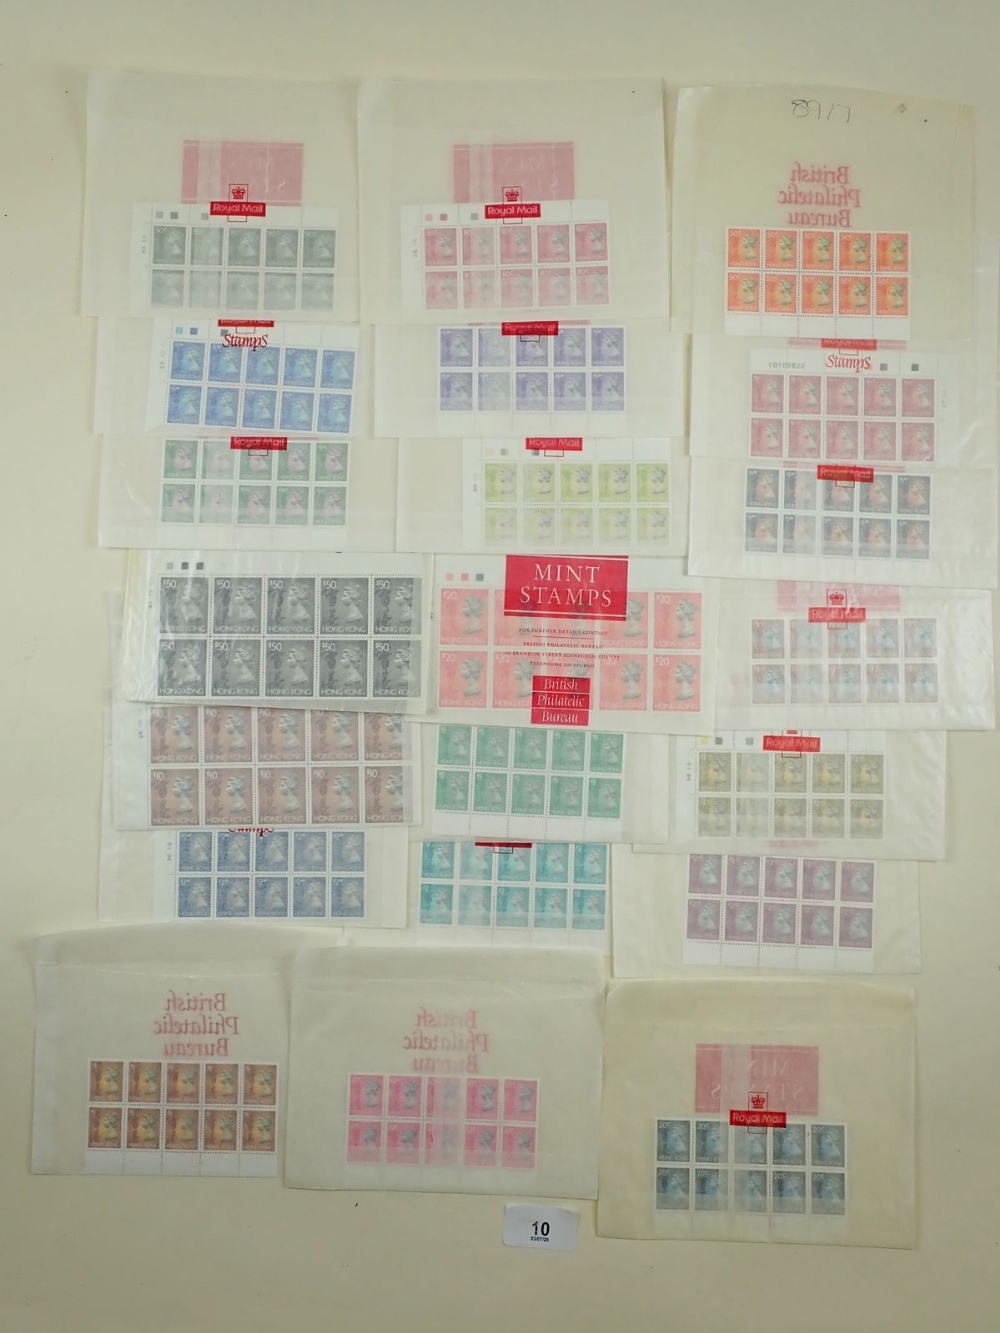 A4 sleeve of QEII Hong Kong unmounted mint defin stamps in blocks of 10, SG Type 155, including